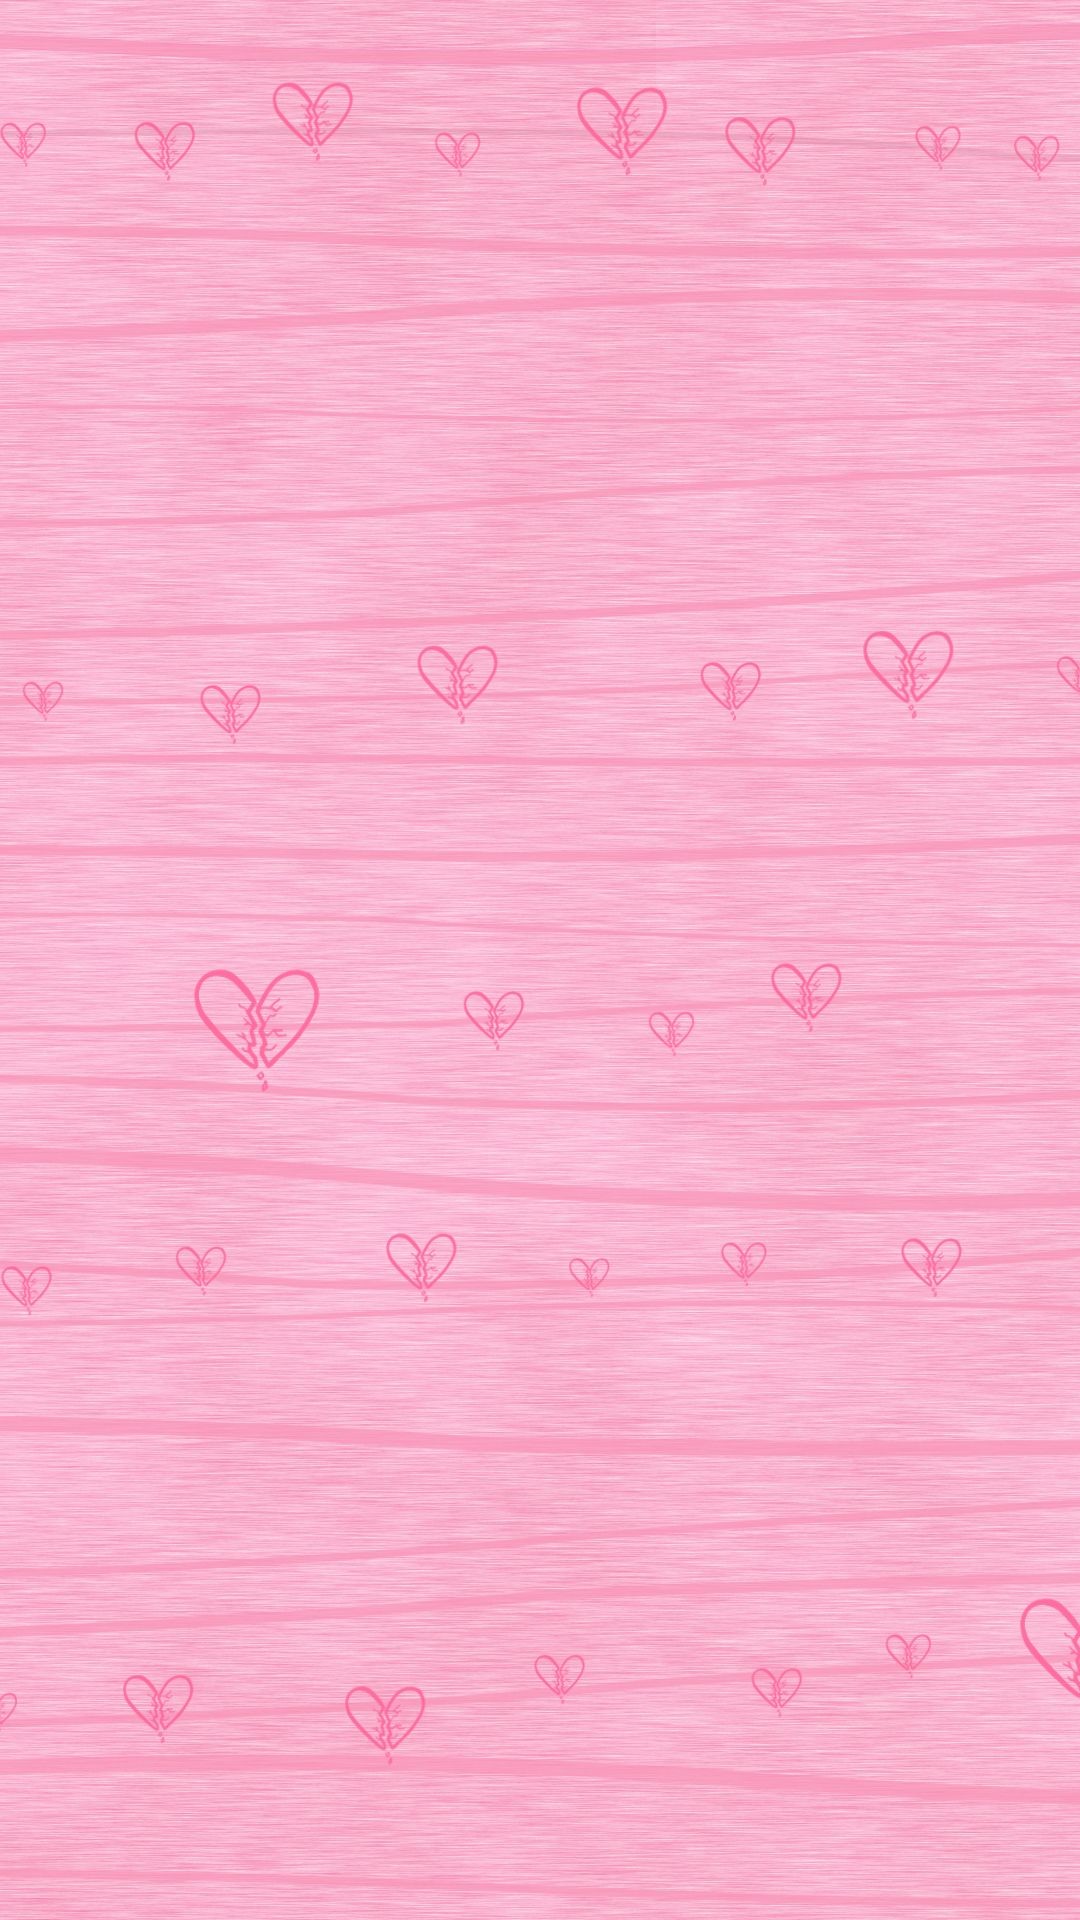 Cute Pink Wallpaper For iPhone Image